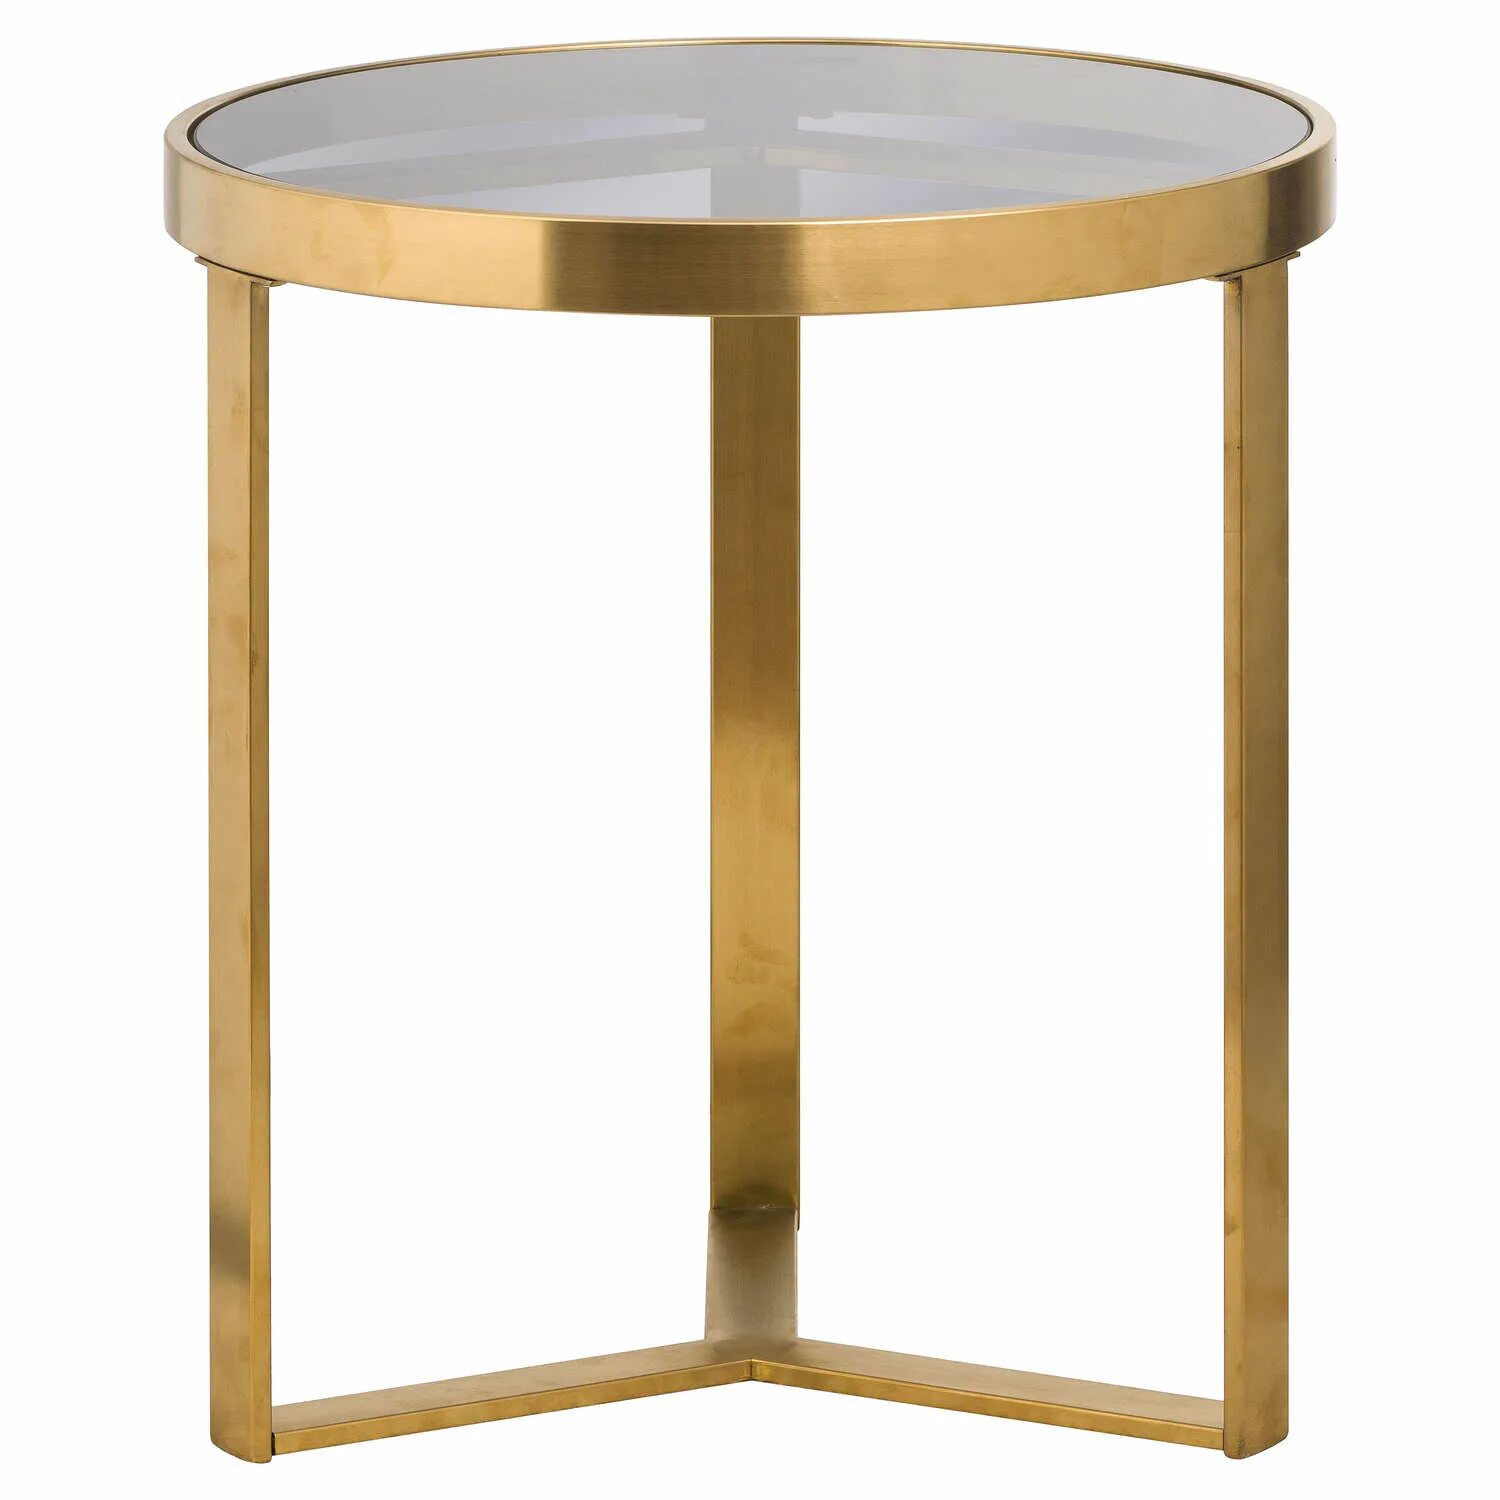 Side Table. Стакан Round. Vetrite Glass Koro Side Table. Mark Newson Side Table. Round side